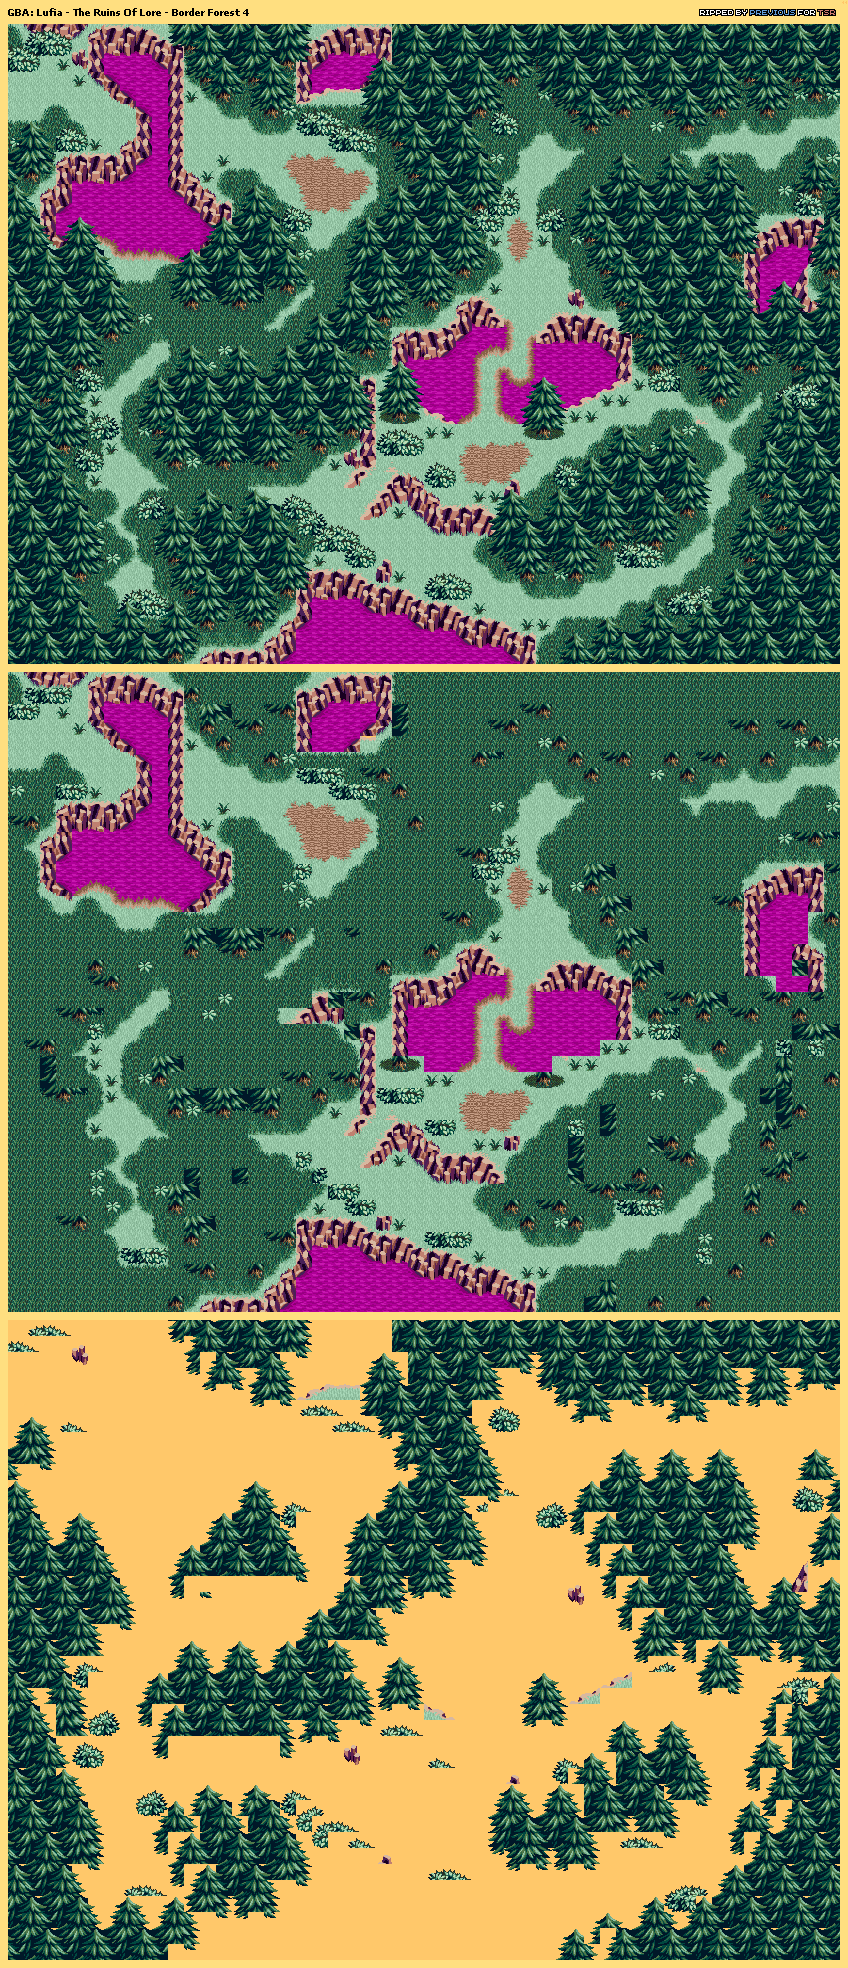 Lufia: The Ruins of Lore - Border Forest 04